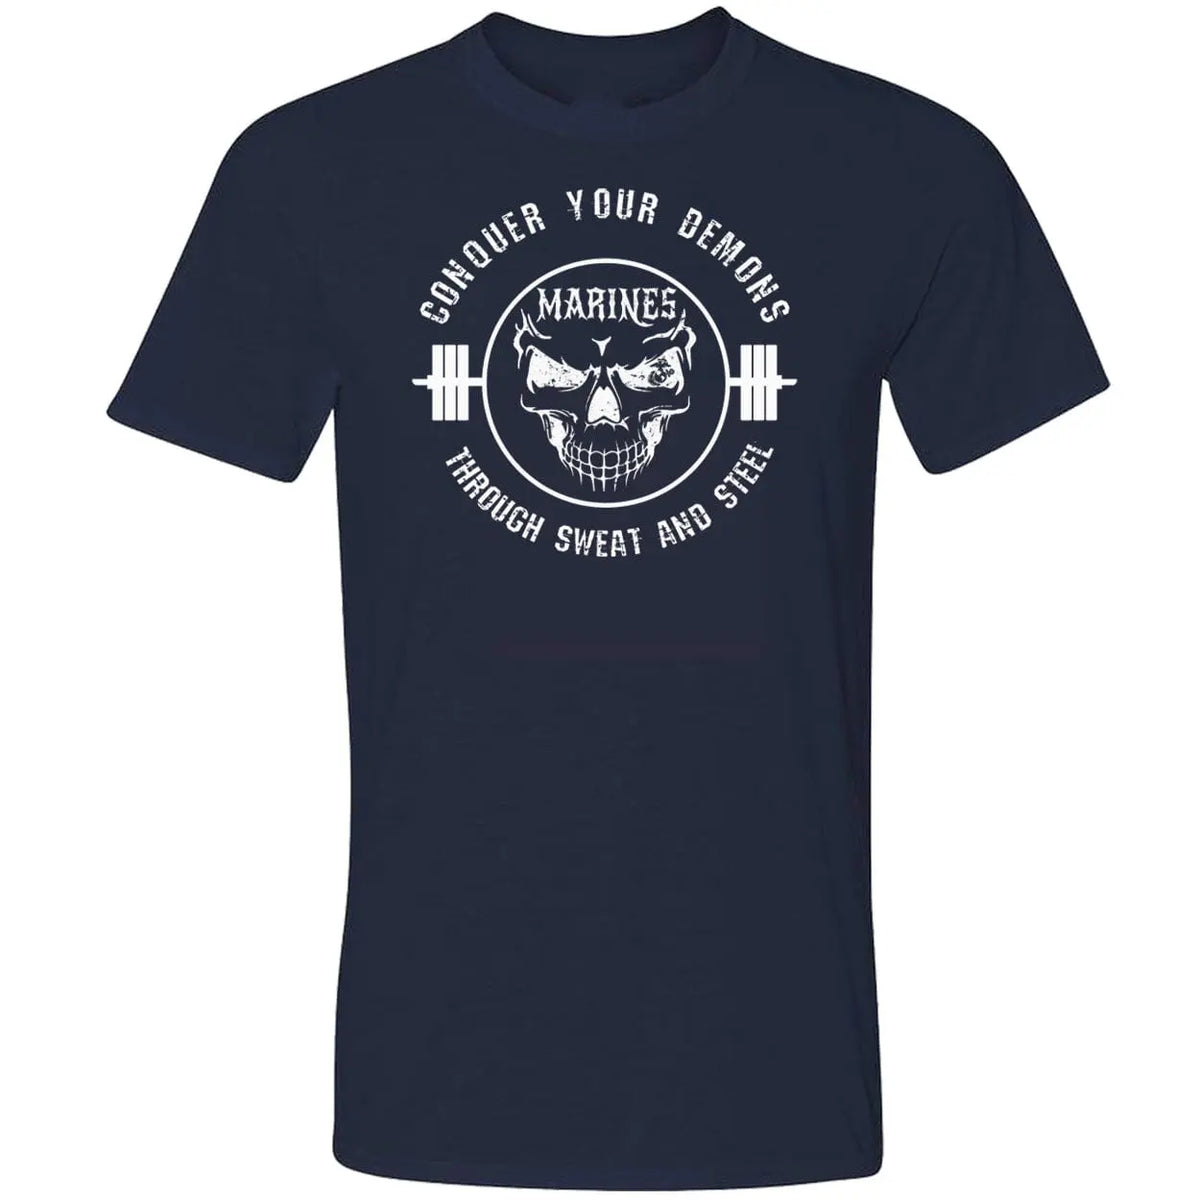 Combat Charged Conquer Your Demons Performance Tee